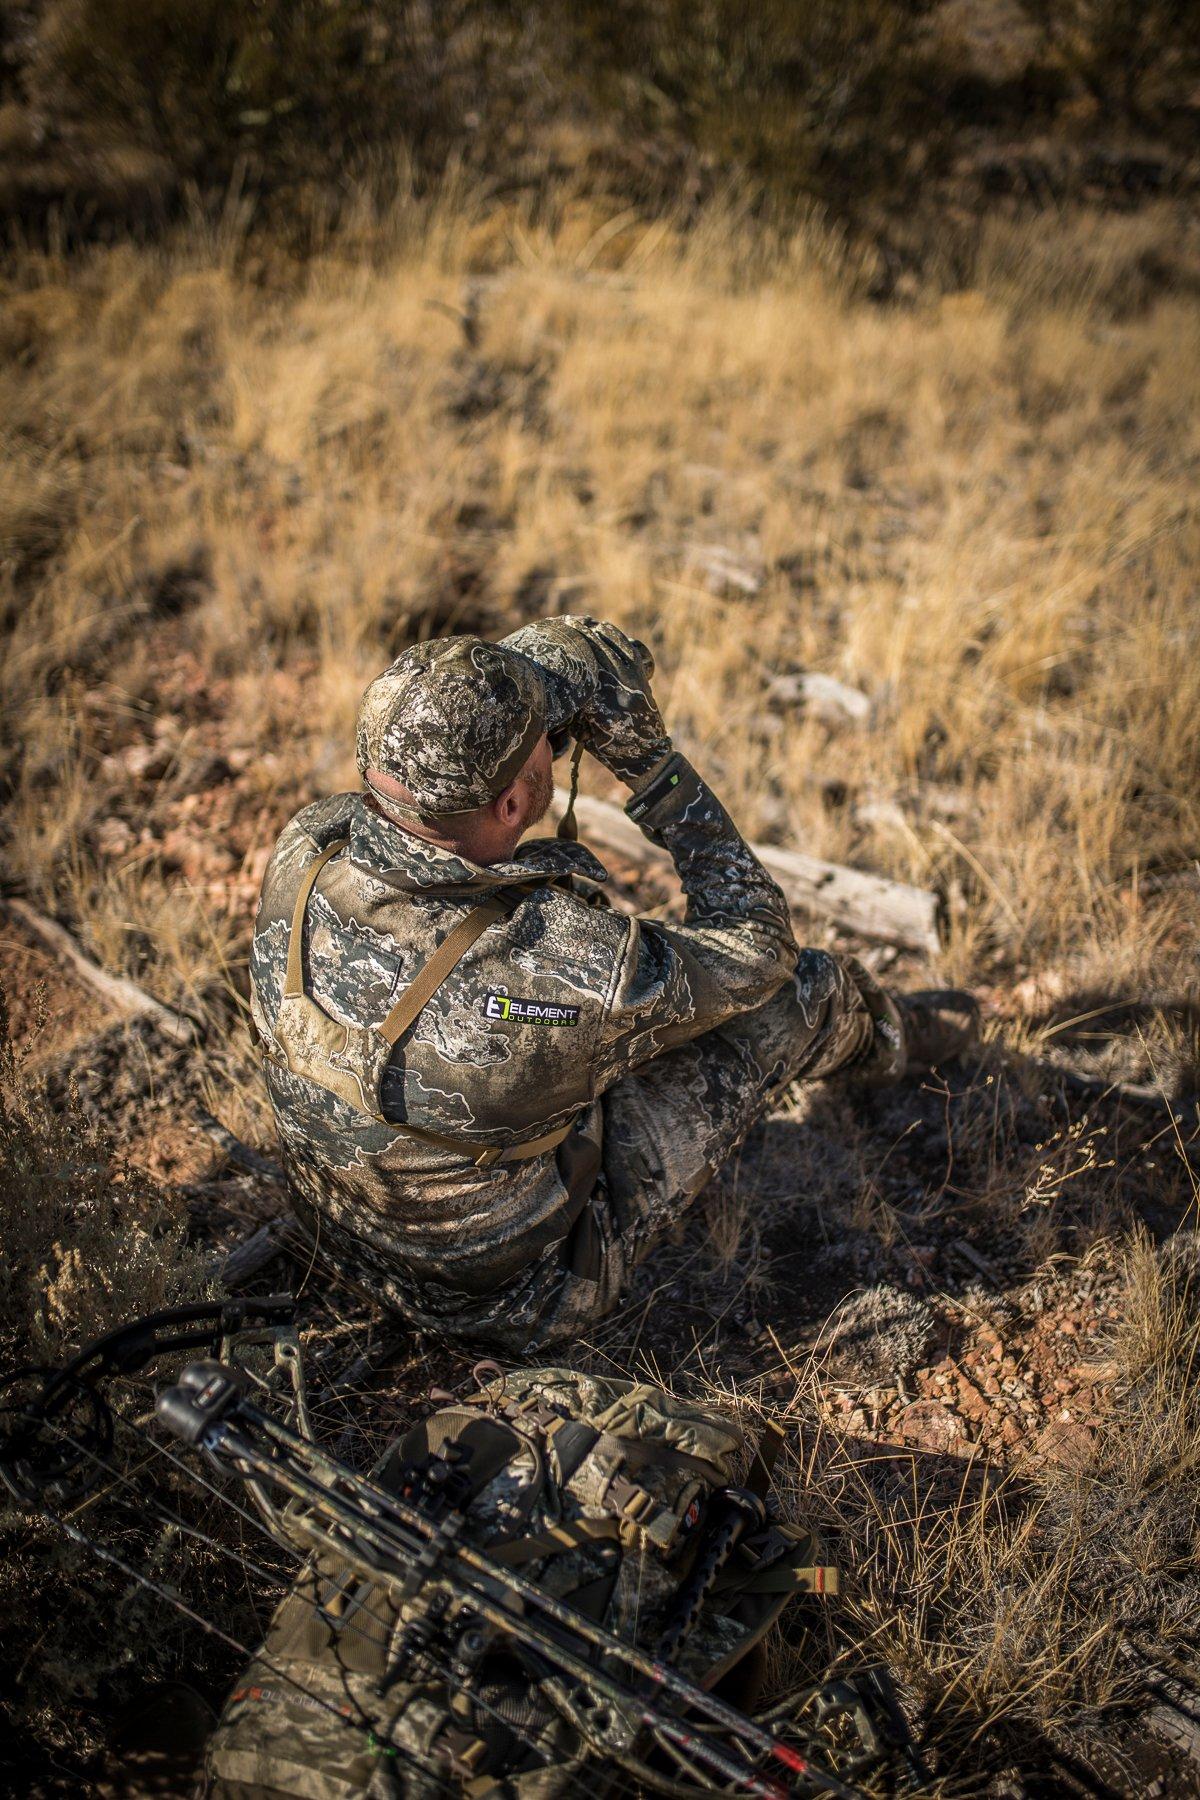 Good glass is a must on any elk hunt. Image by Bill Konway